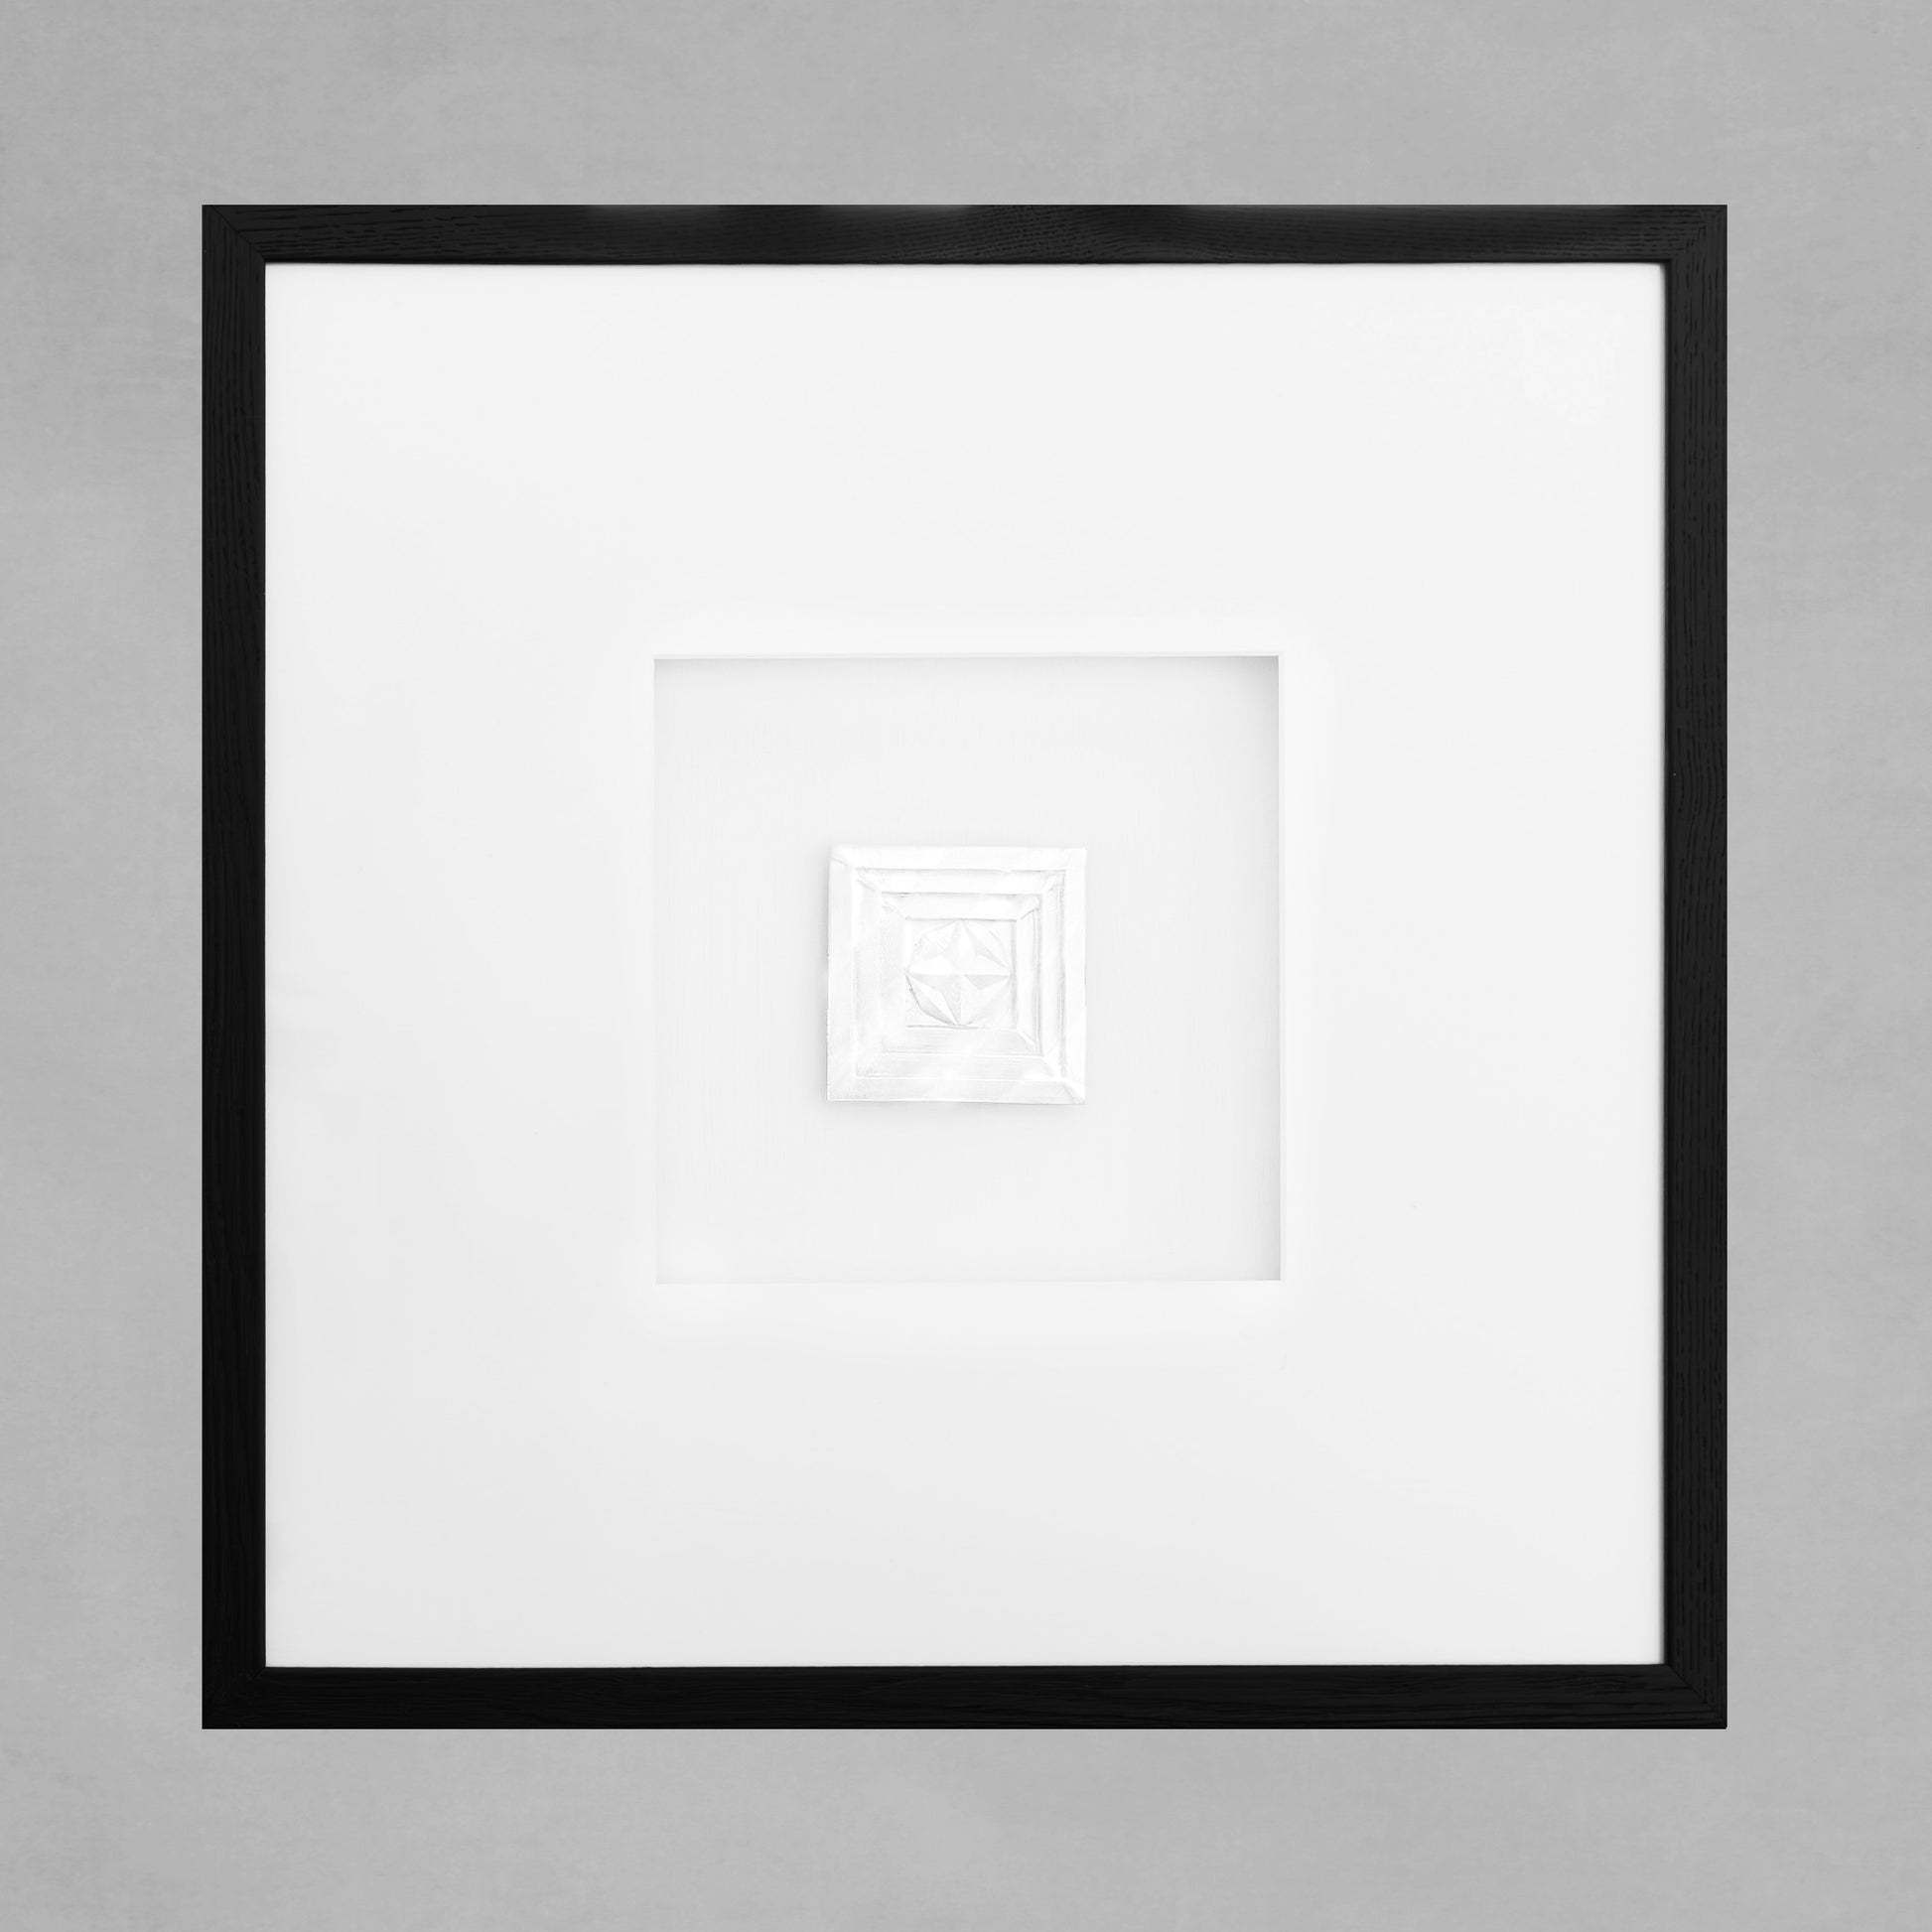 Contemporary framed art deco square artwork with black frame on gray background.